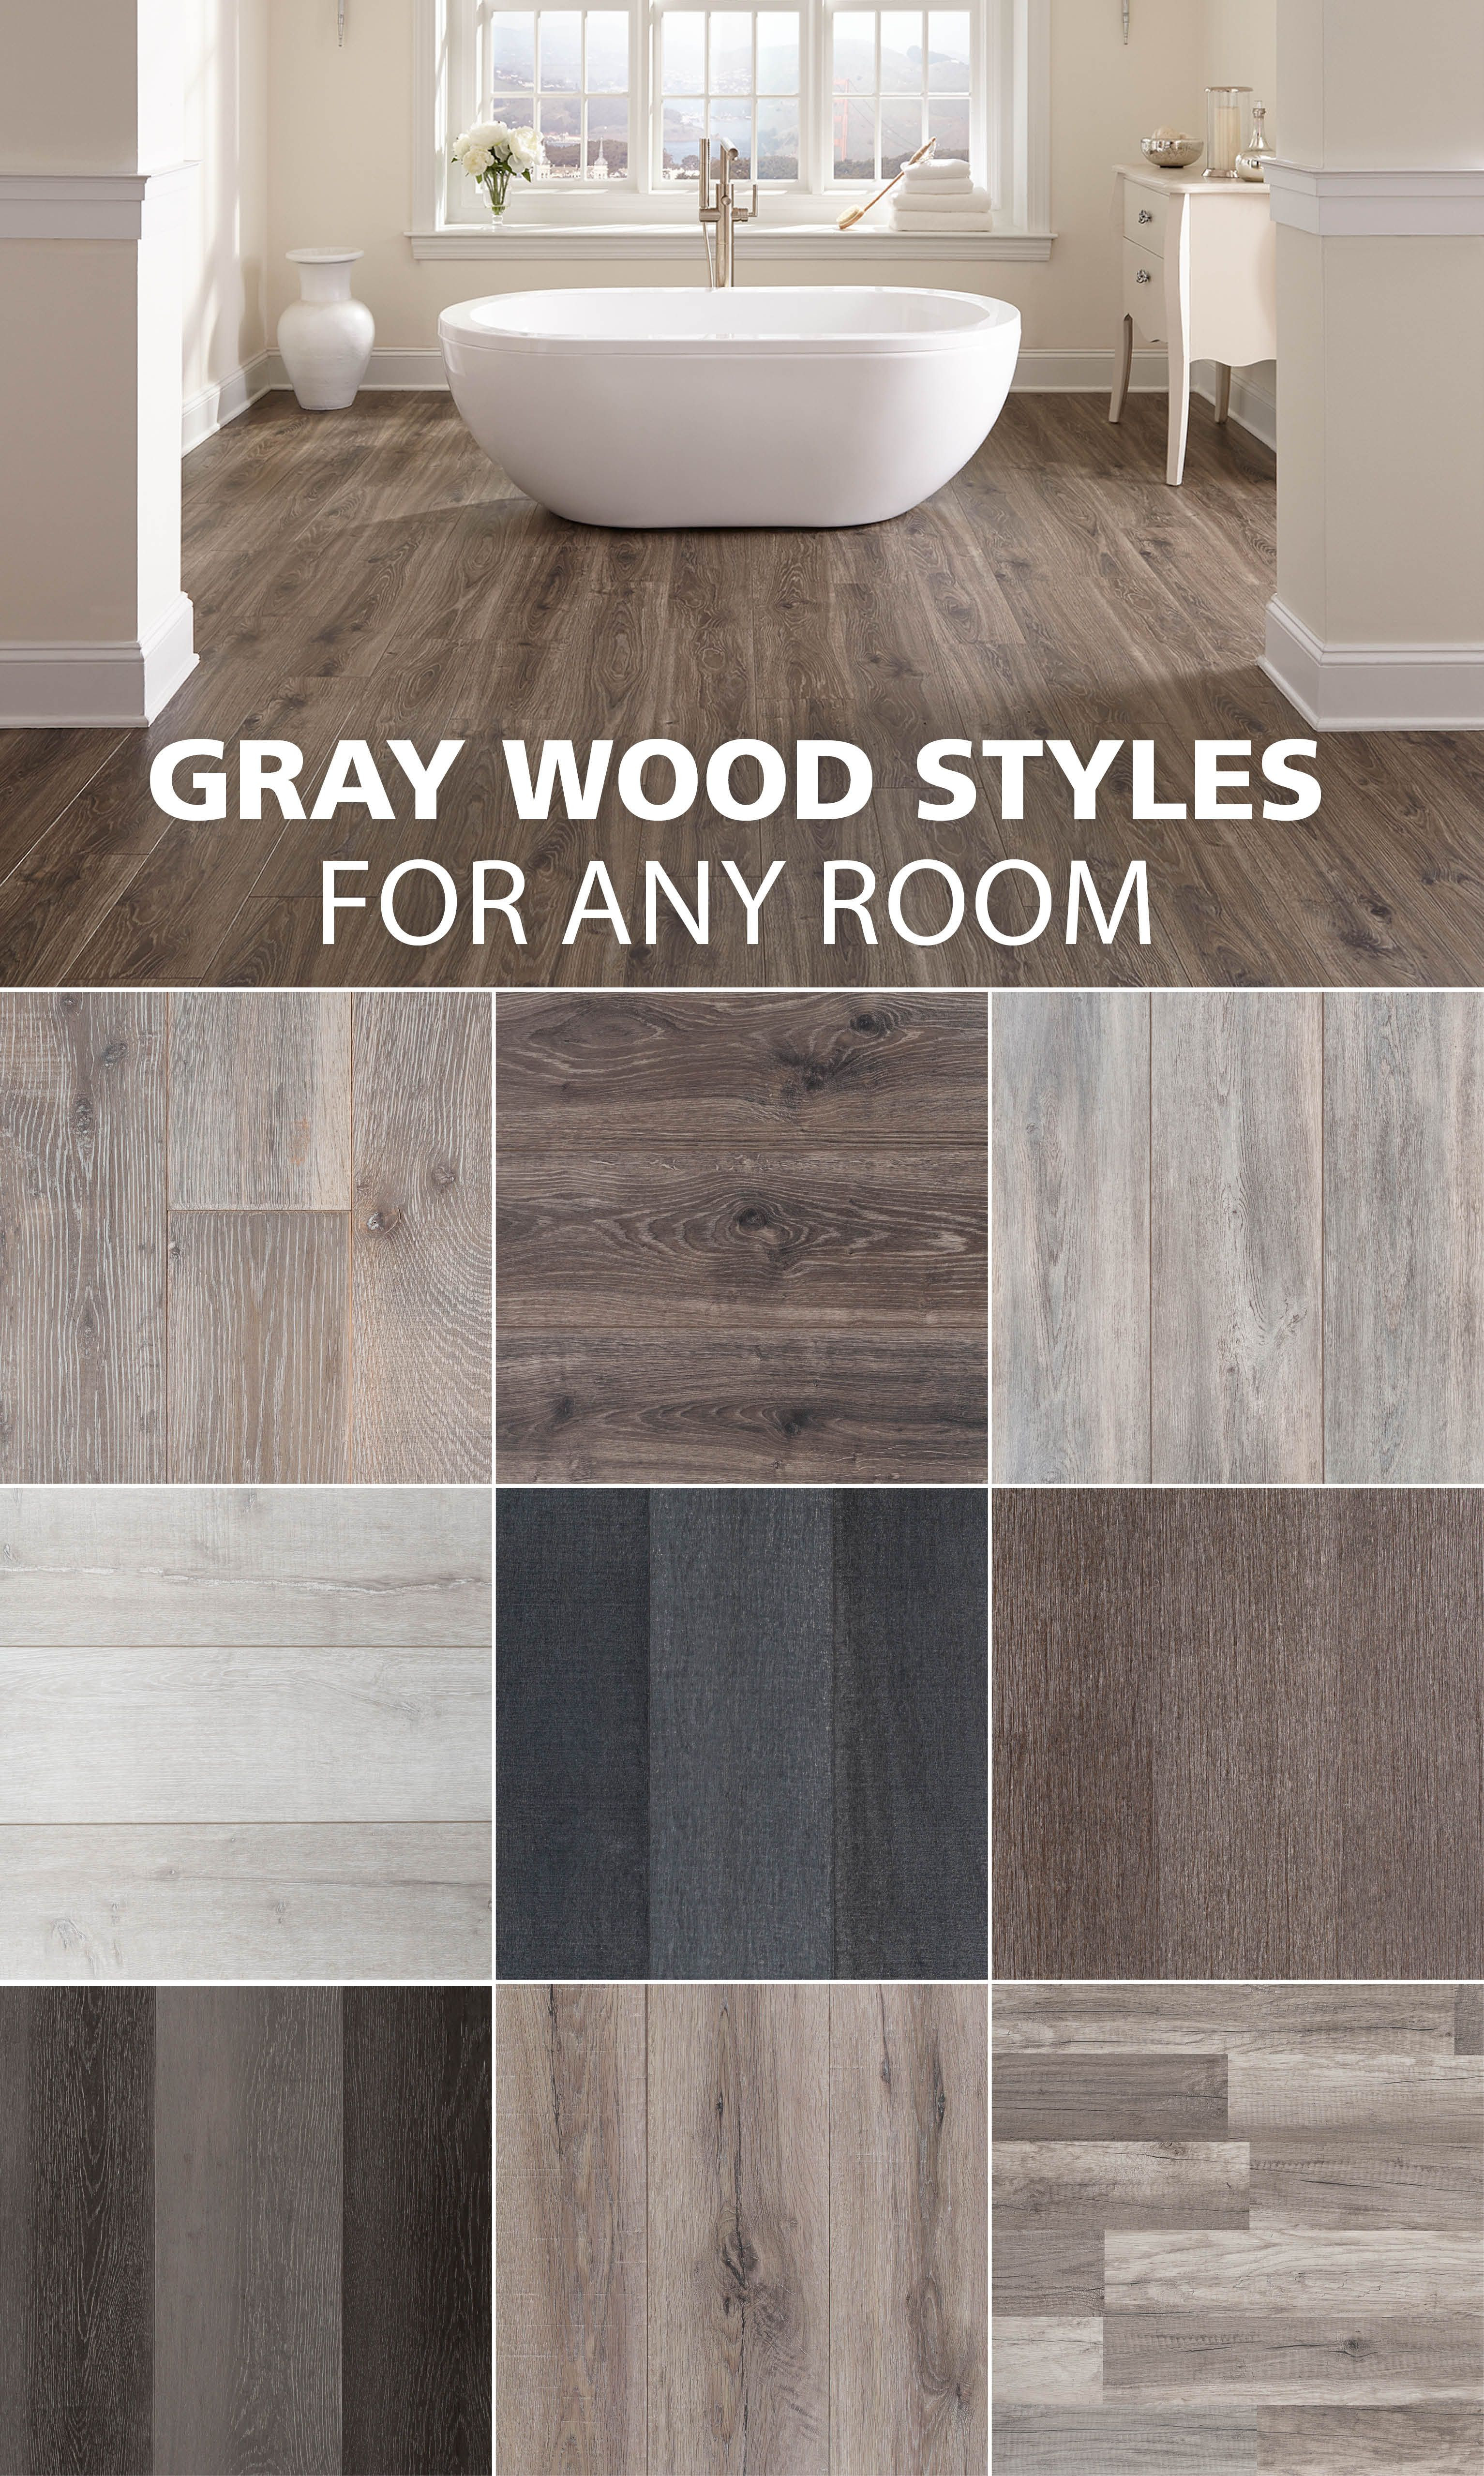 5 Inch Maple Hardwood Flooring Of Here are some Of Our Favorite Gray Wood Look Styles Home Decor Pertaining to Here are some Of Our Favorite Gray Wood Look Styles Gray Hardwood Floors Light